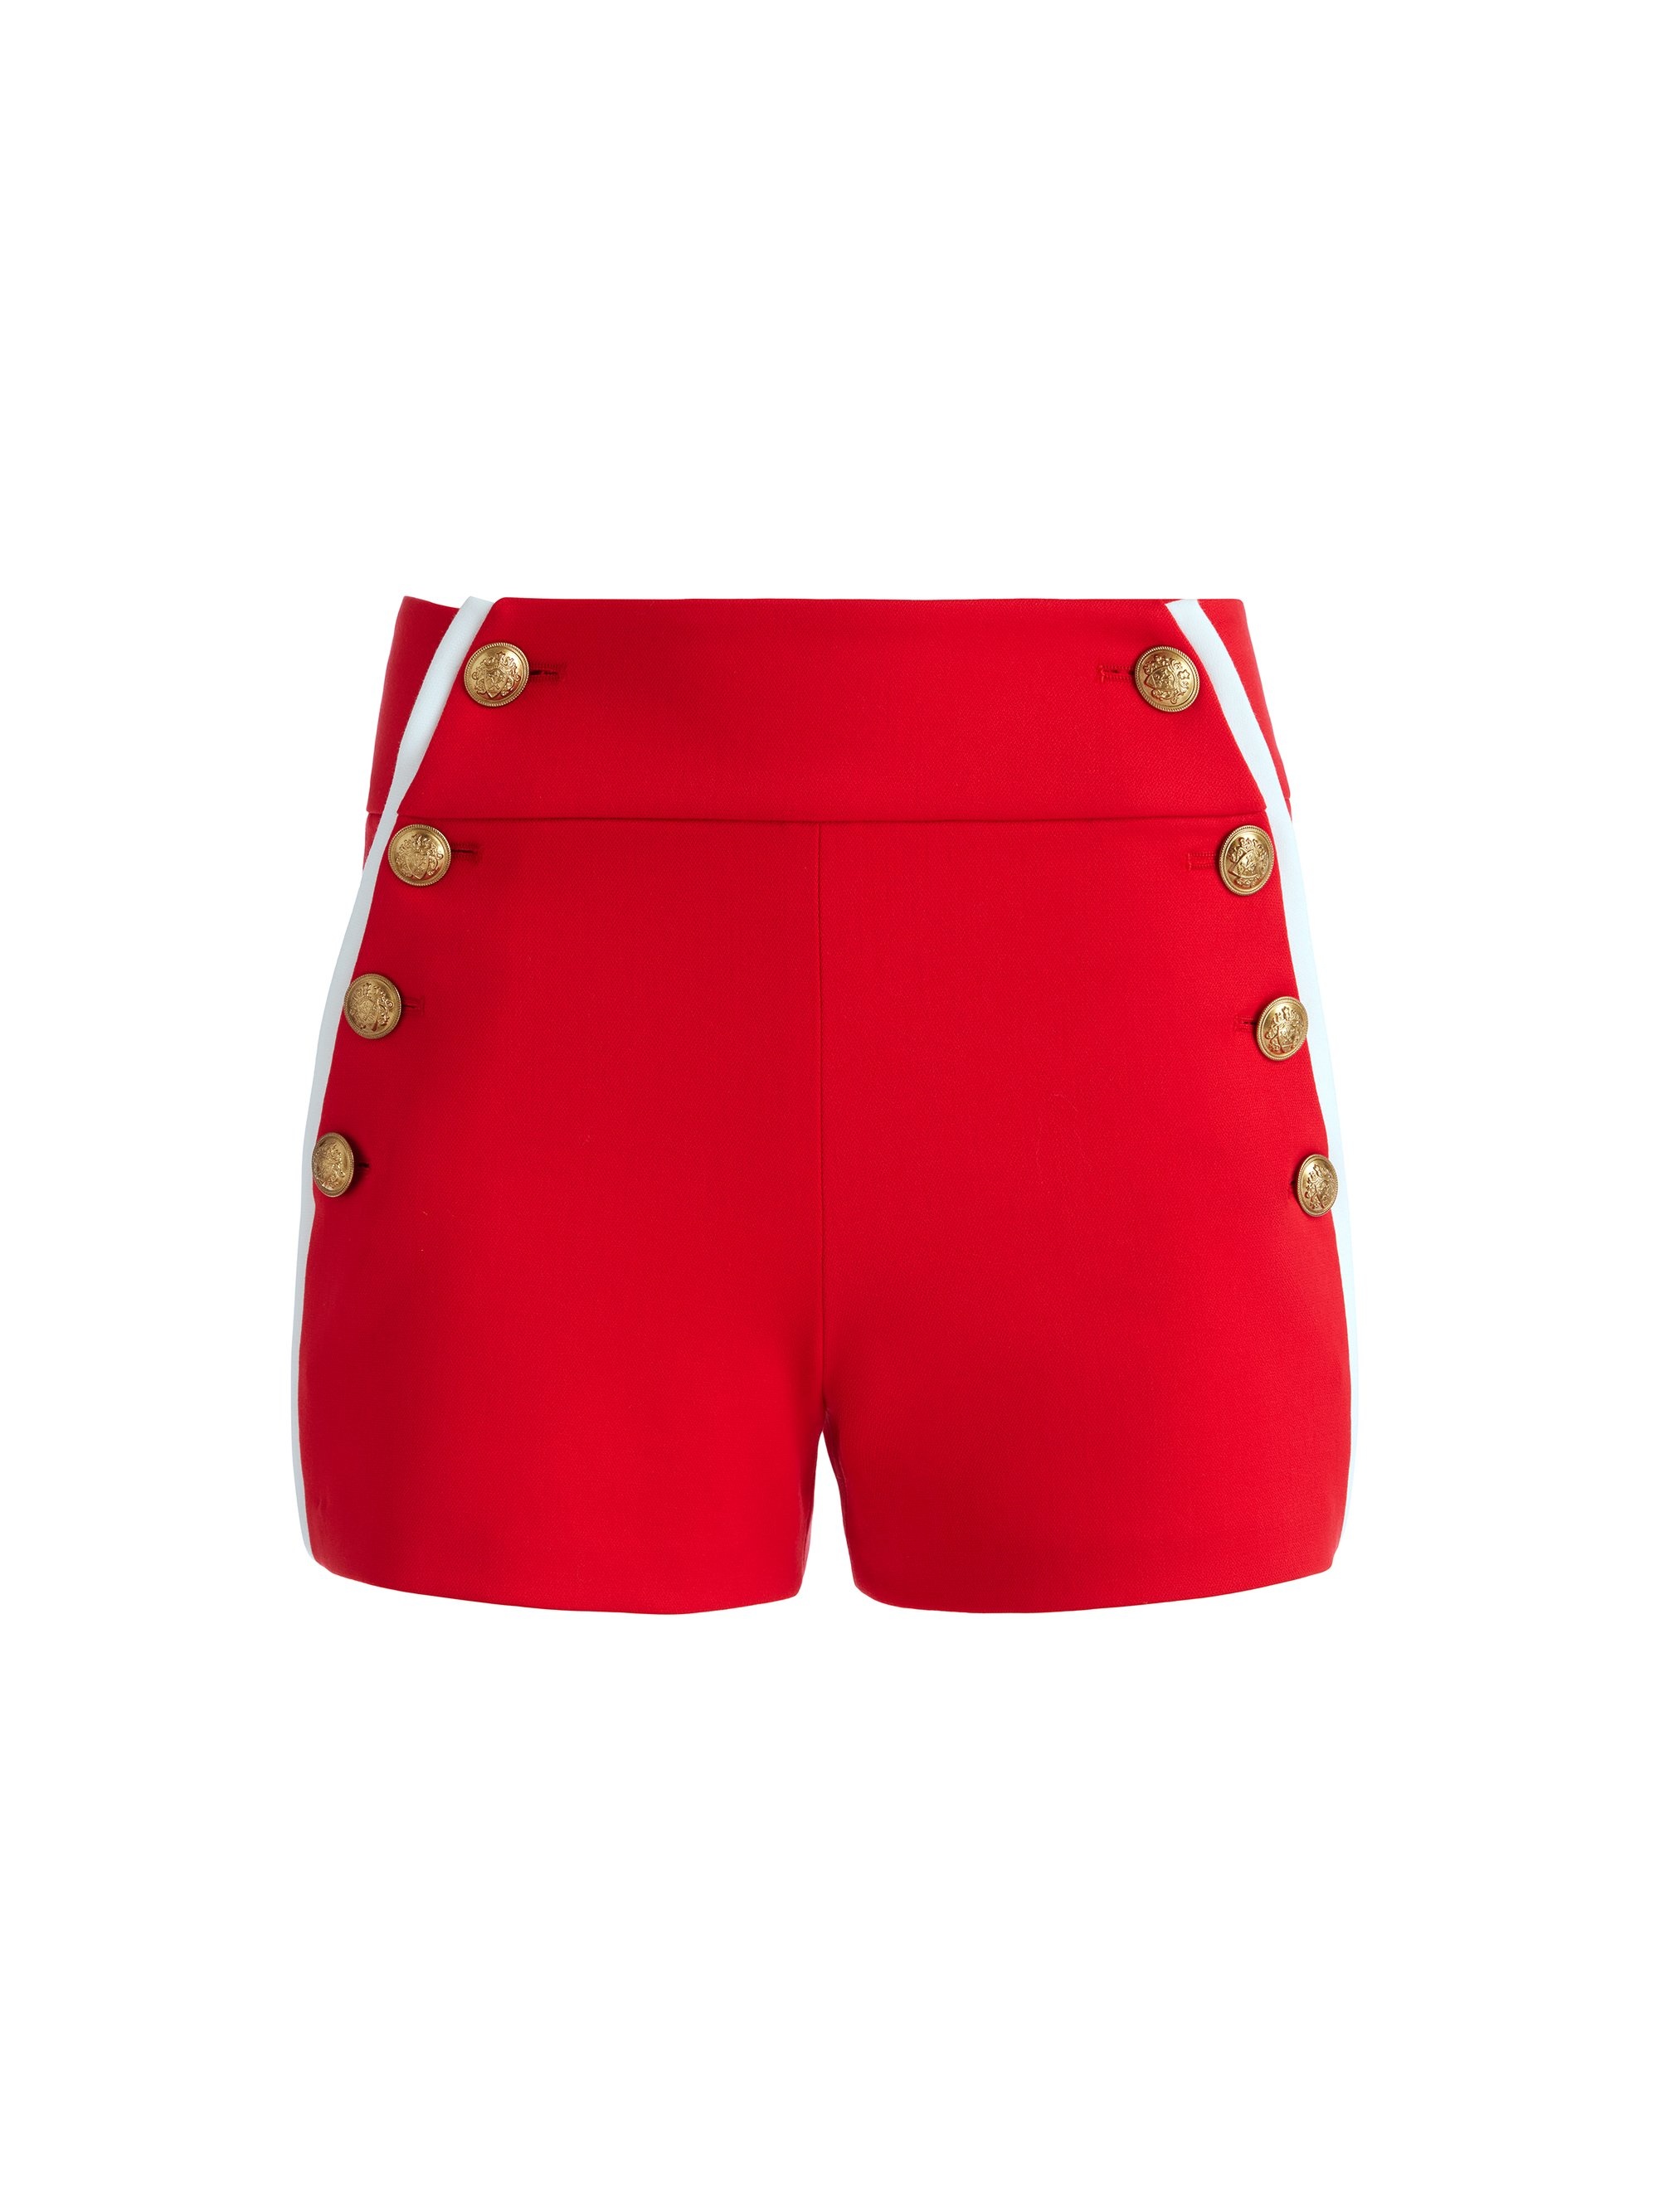 NARIN HIGH RISE BUTTON FRONT SHORT - 1